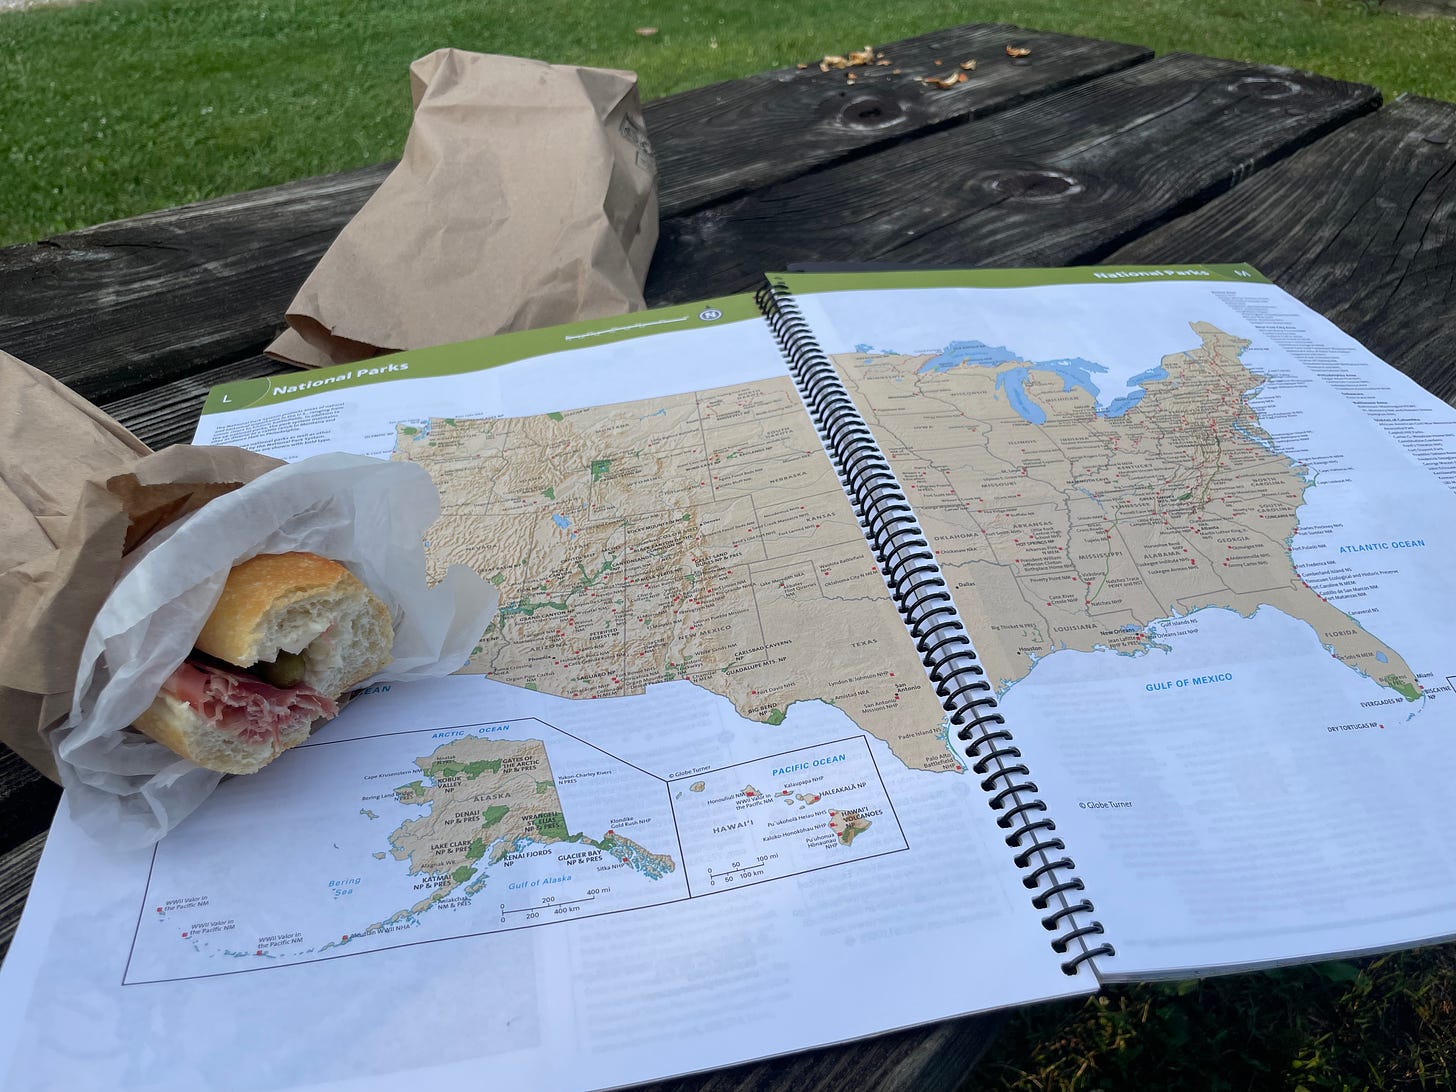 Photograph of a map of the United States laid out on a picnic table, next to a sandwich in a brown paper bag.